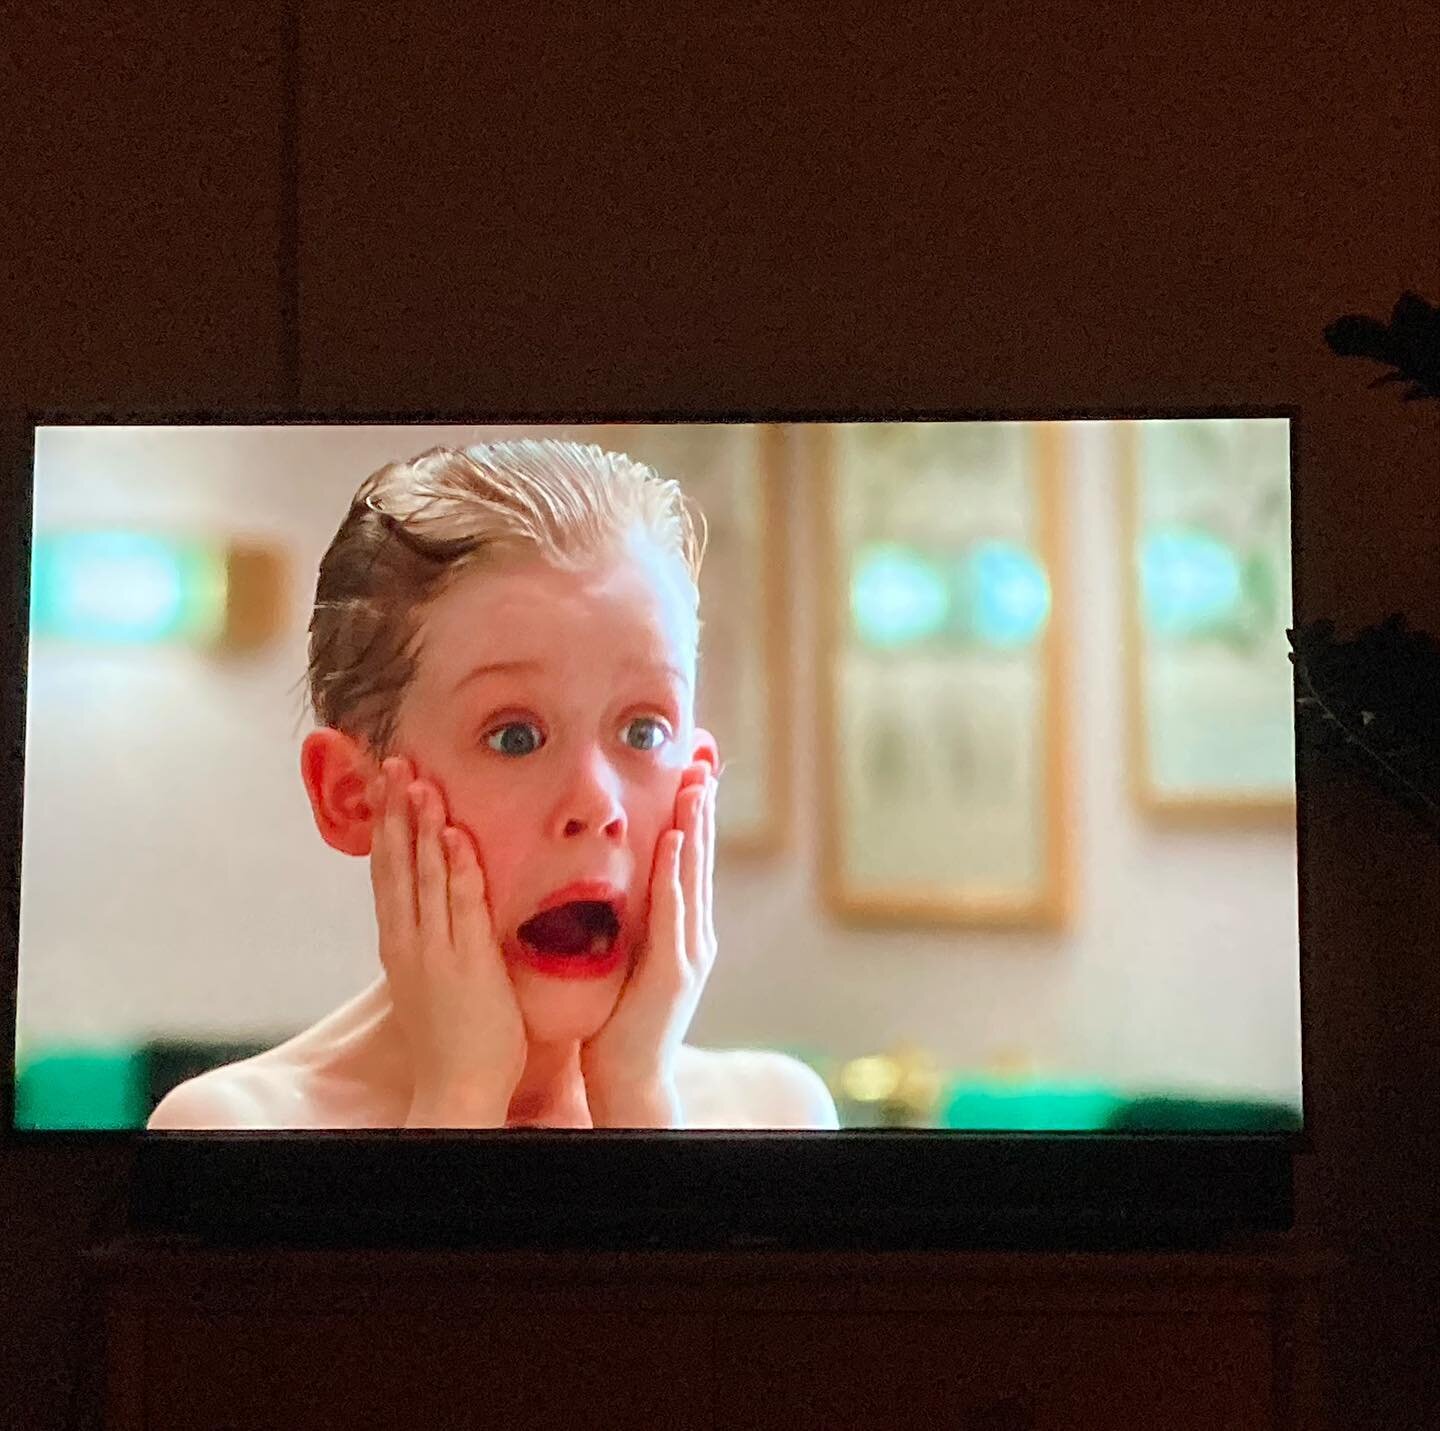 Starting the countdown to Christmas the right way. #homealone #christmas